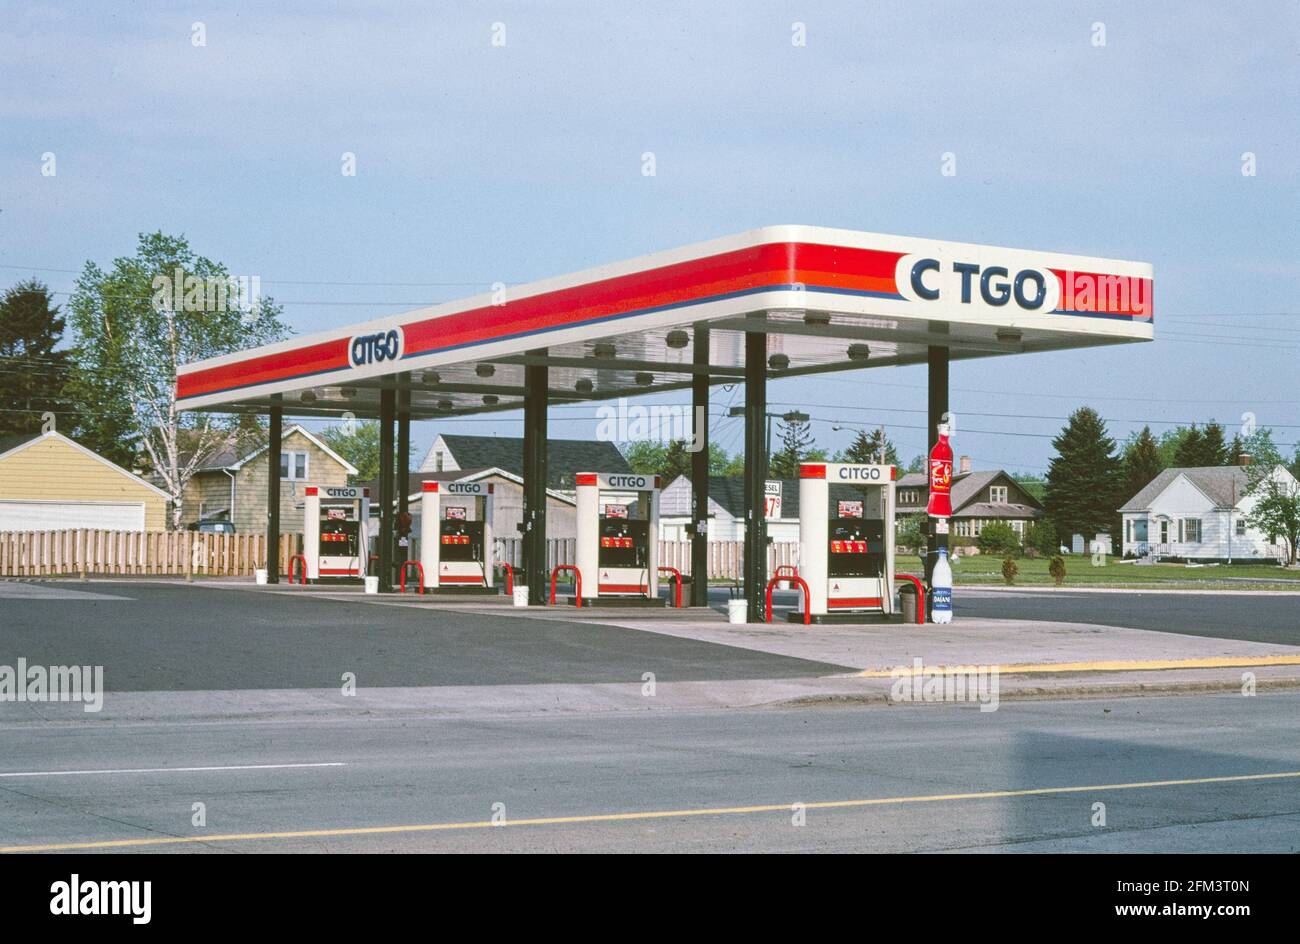 Citgo gas station overall view Route 2 Superior Wisconsin ca. 2003 Stock Photo